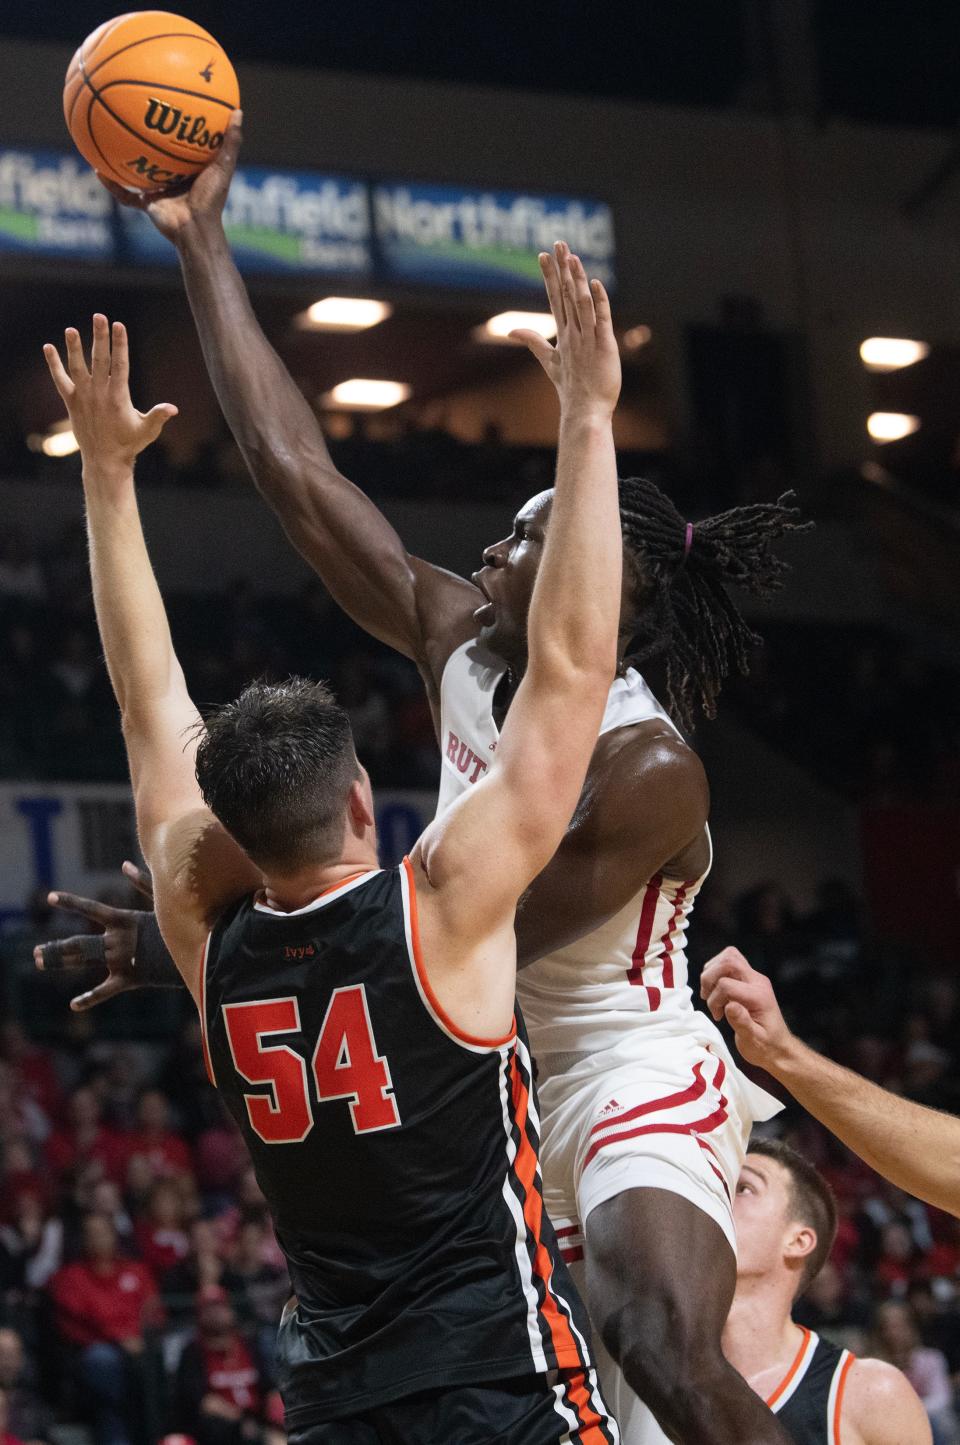 Rutgers' Clifford Omoruyi shoots above Princeton's Zach Martini during the men's college basketball game played at the Cure Insurance Arena in Trenton on Monday, November 6, 2023.